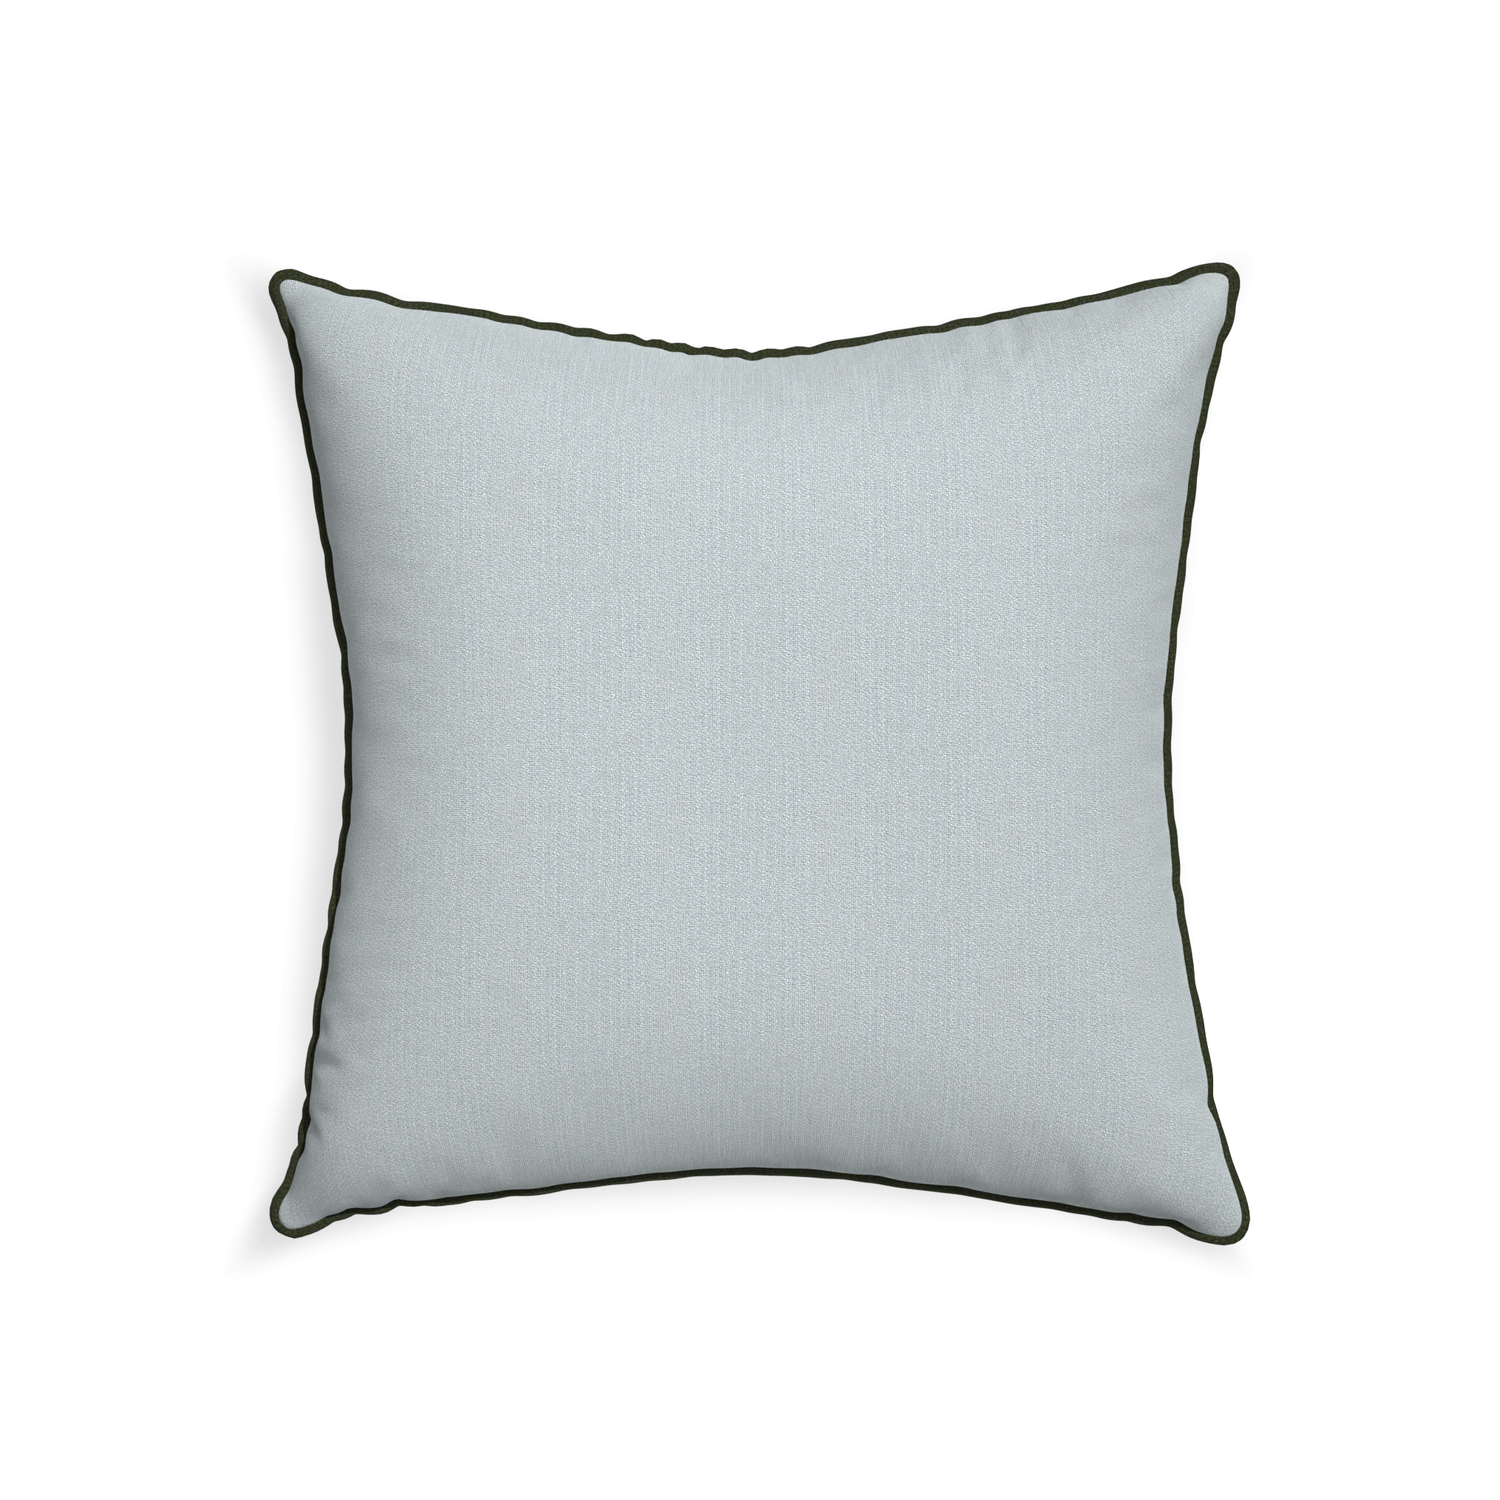 22-square sea custom grey bluepillow with f piping on white background